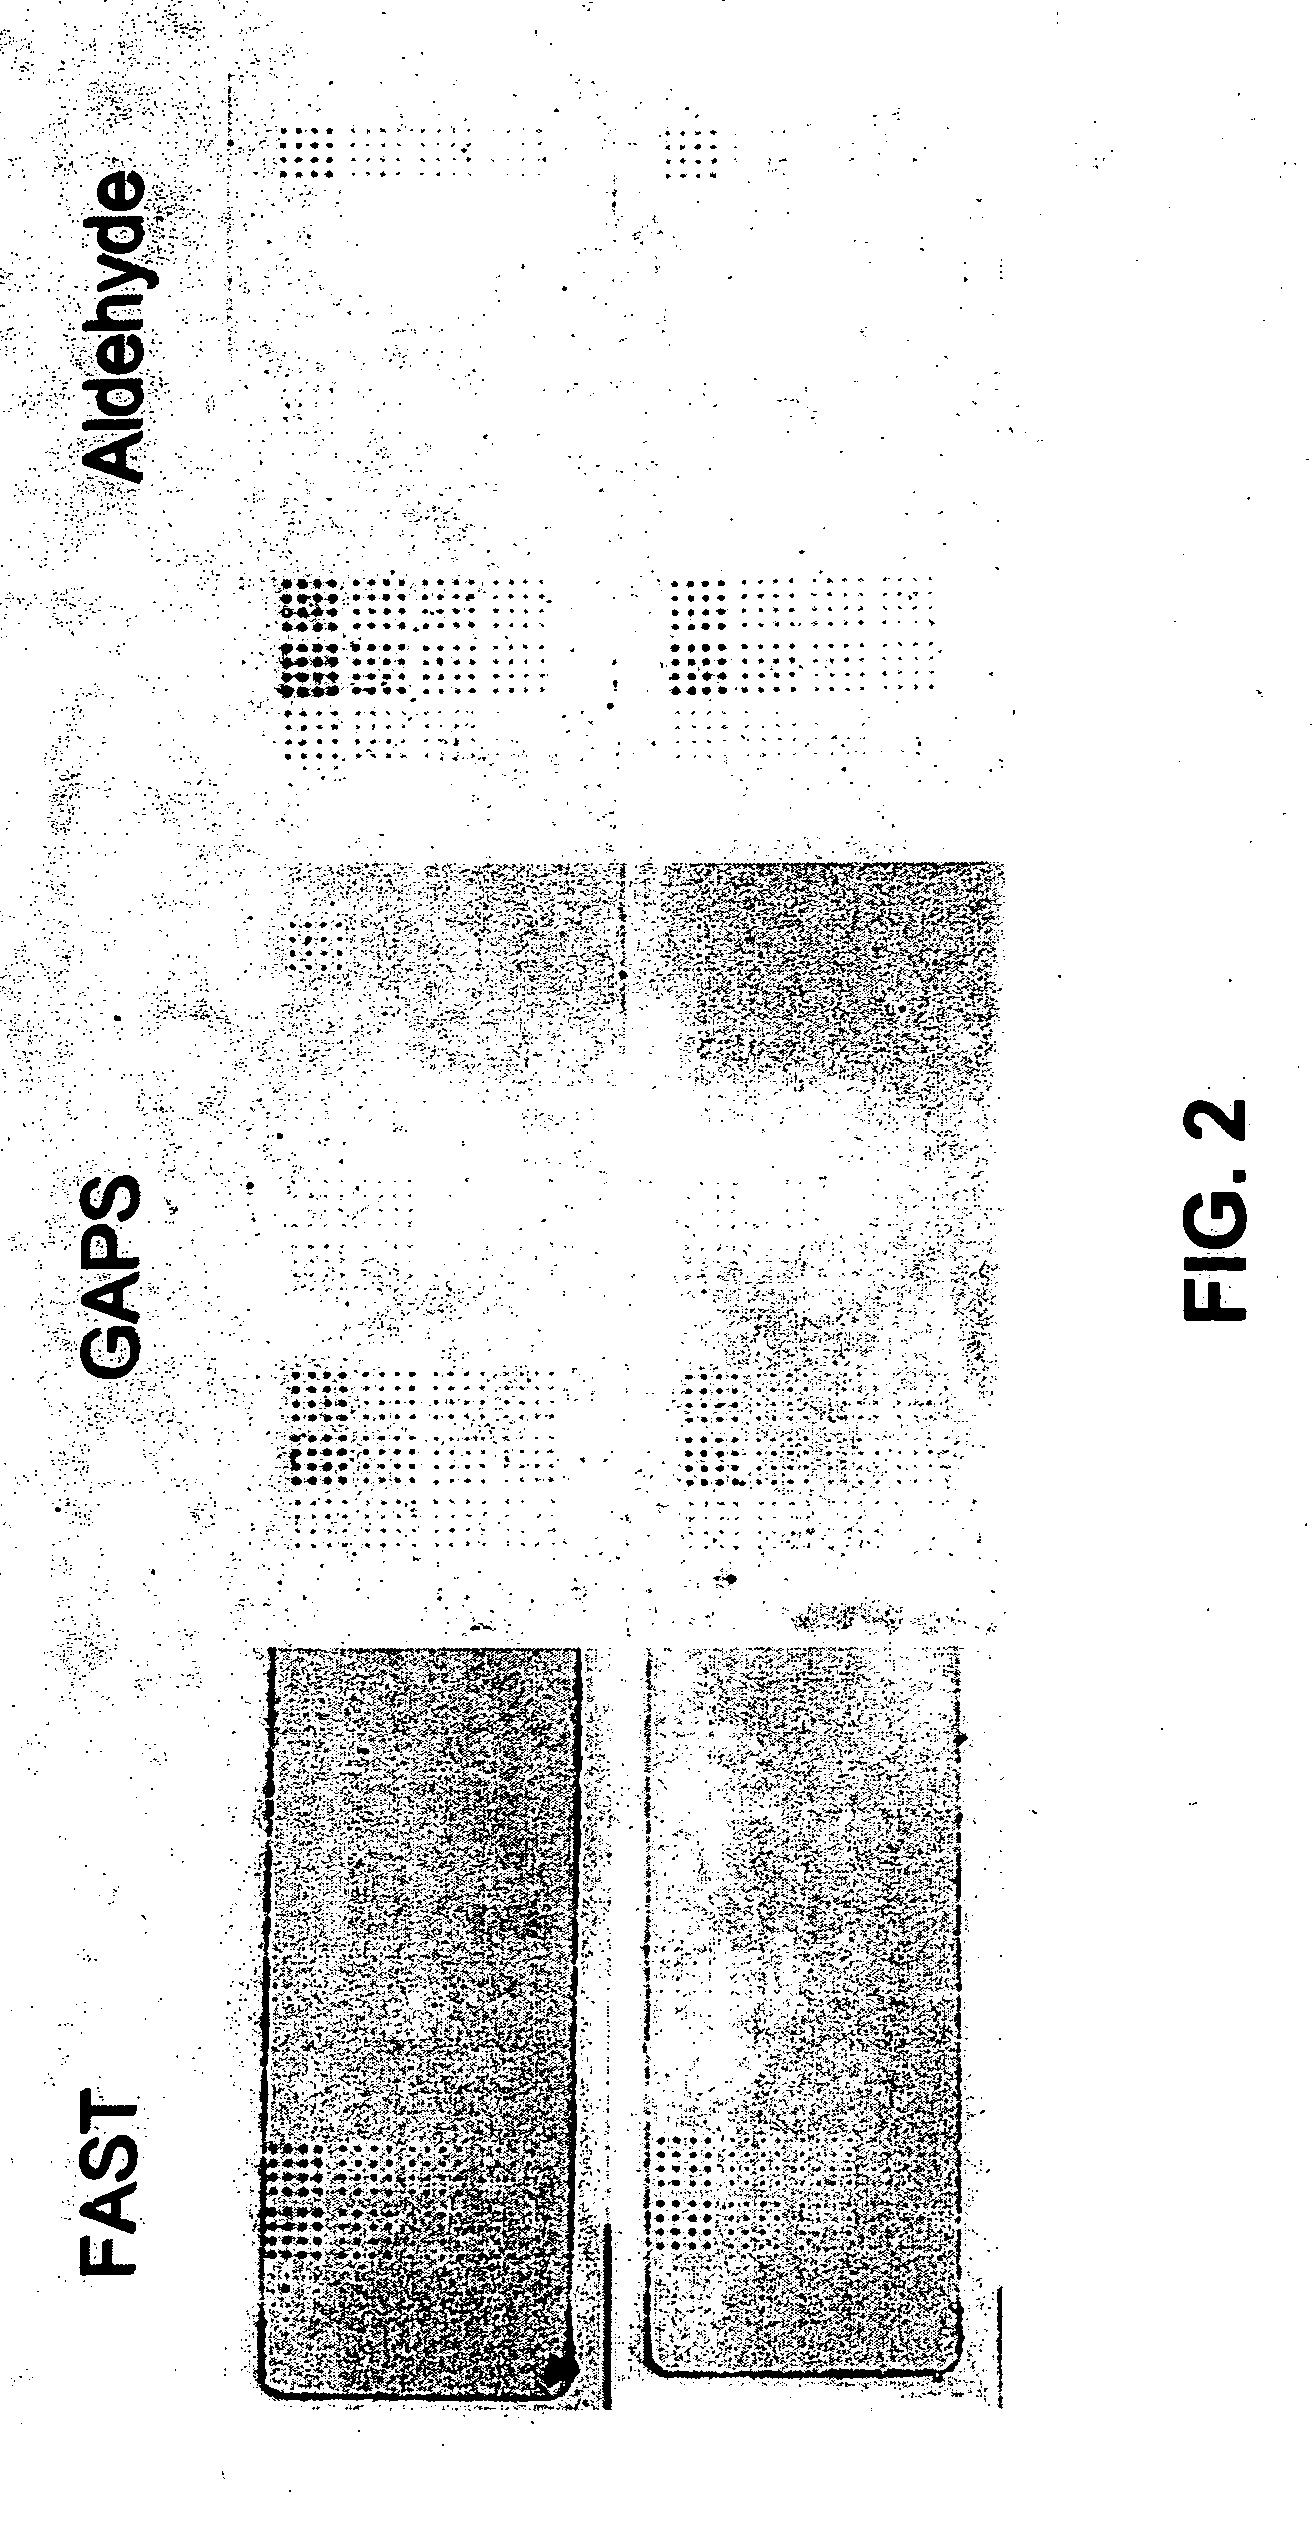 Methods for conducting assays for enzyme activity on protein microarrays